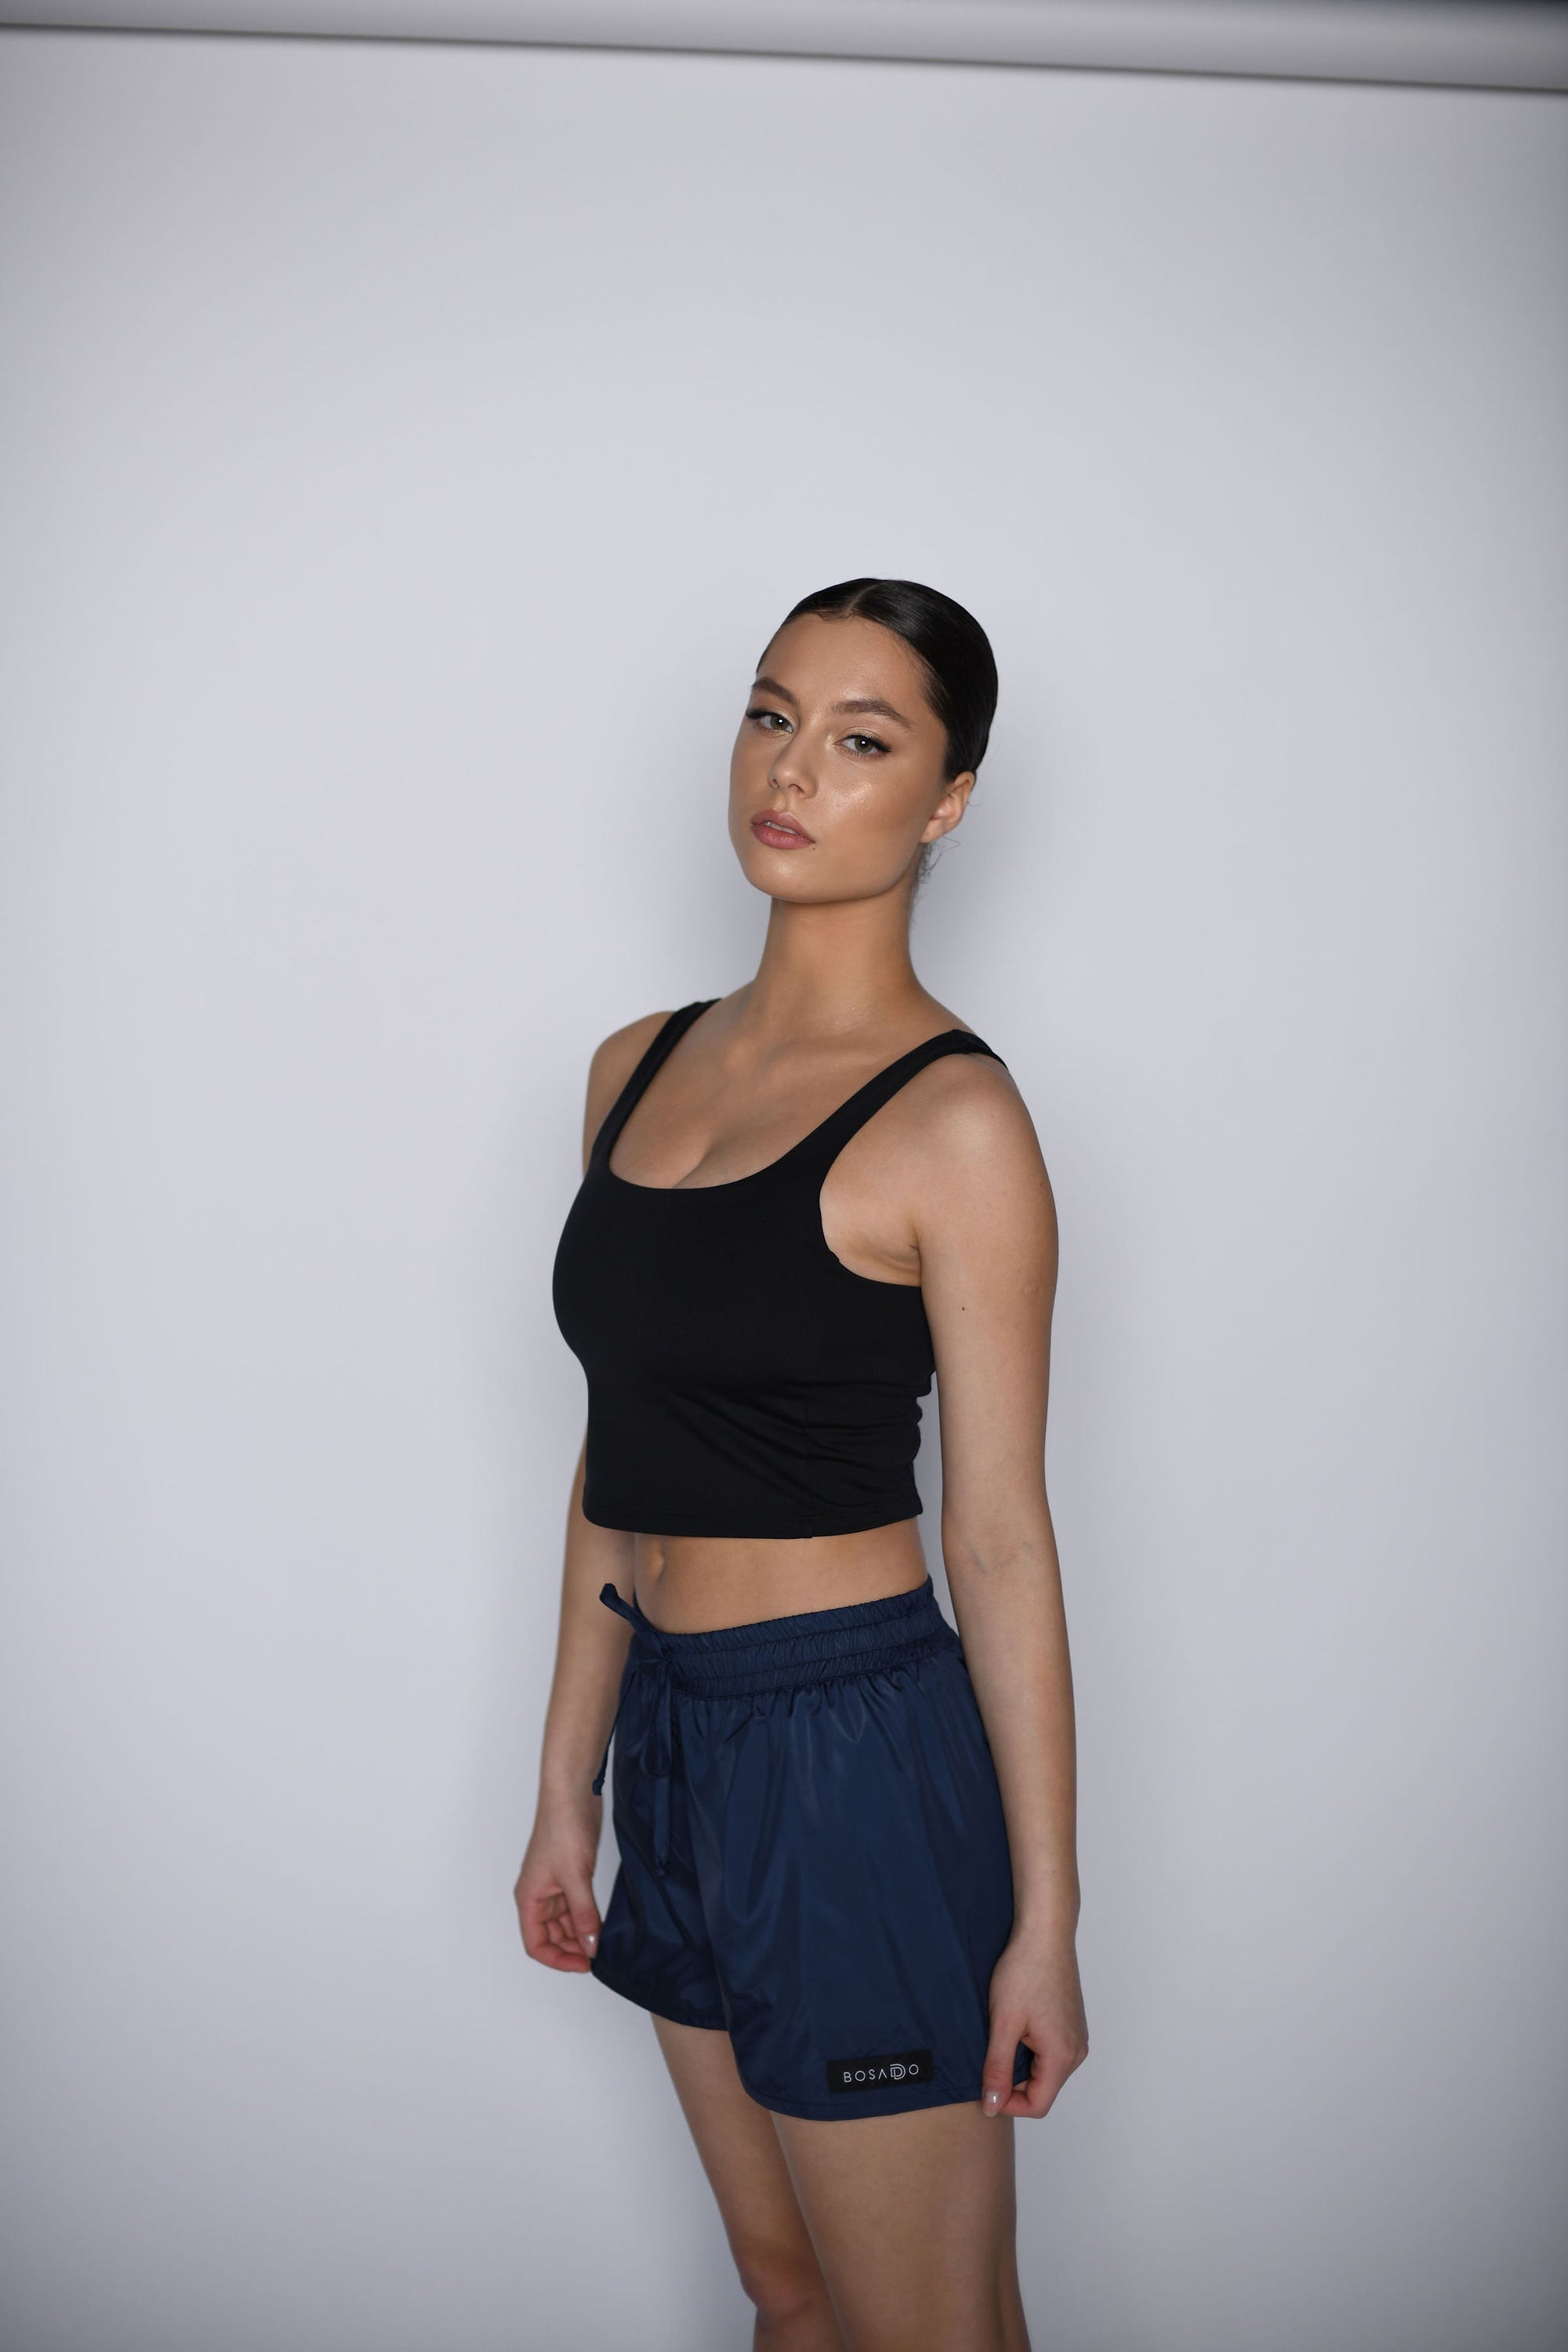 NEW URBAN SWAN COLLECTION S/S 23 | Royal blue shorts